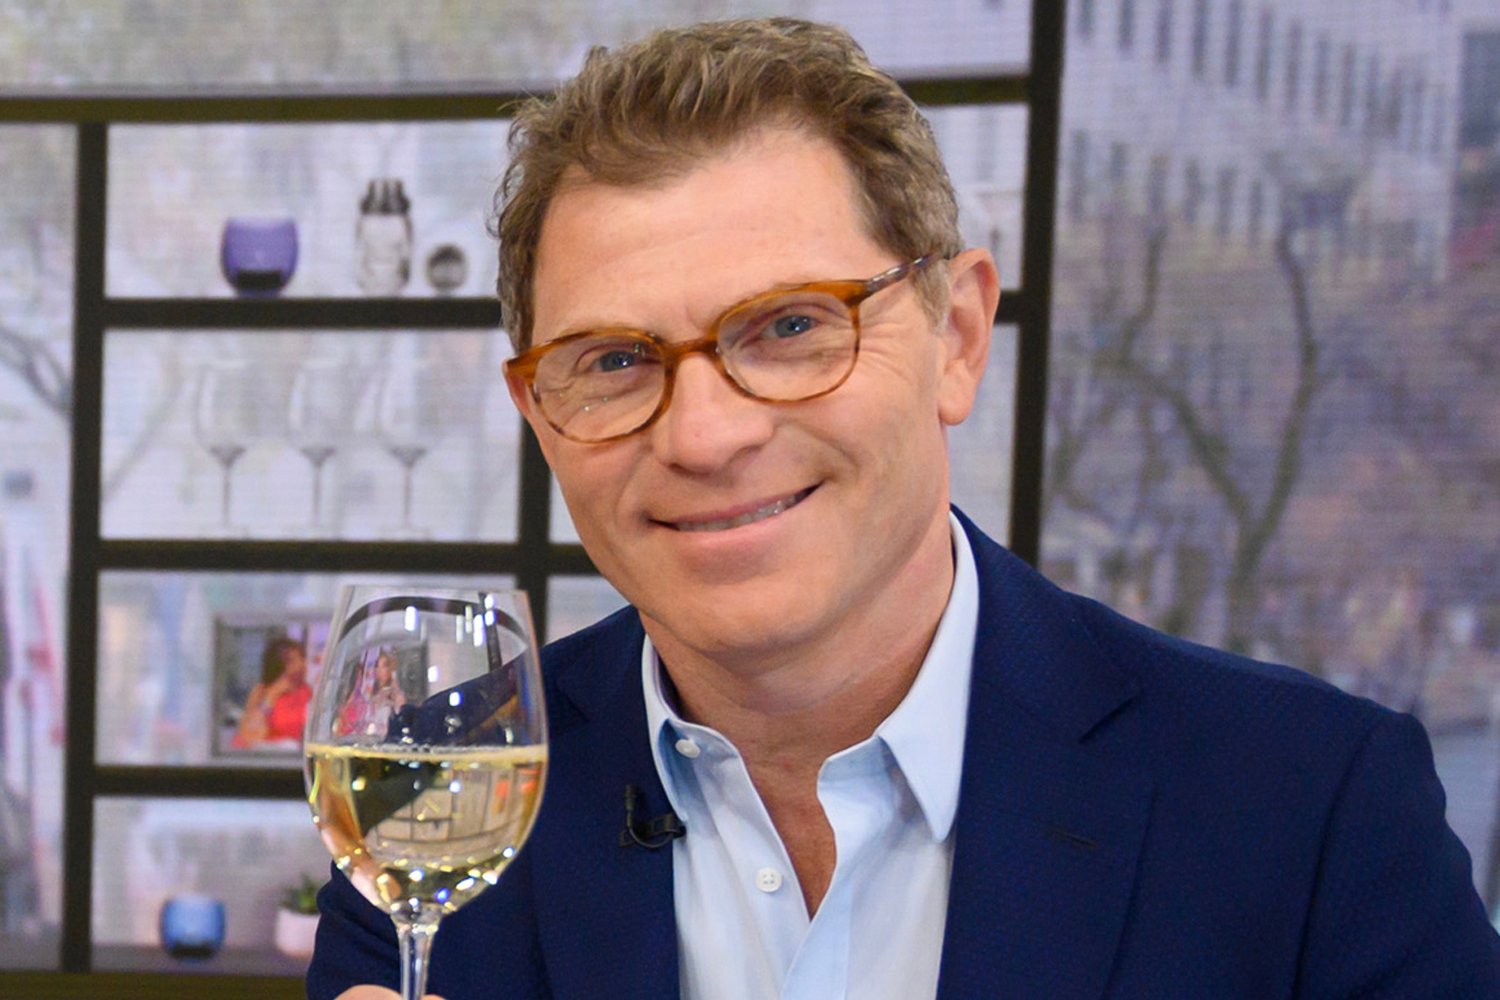 Bobby Flay wearing glasses and holding a wine glass